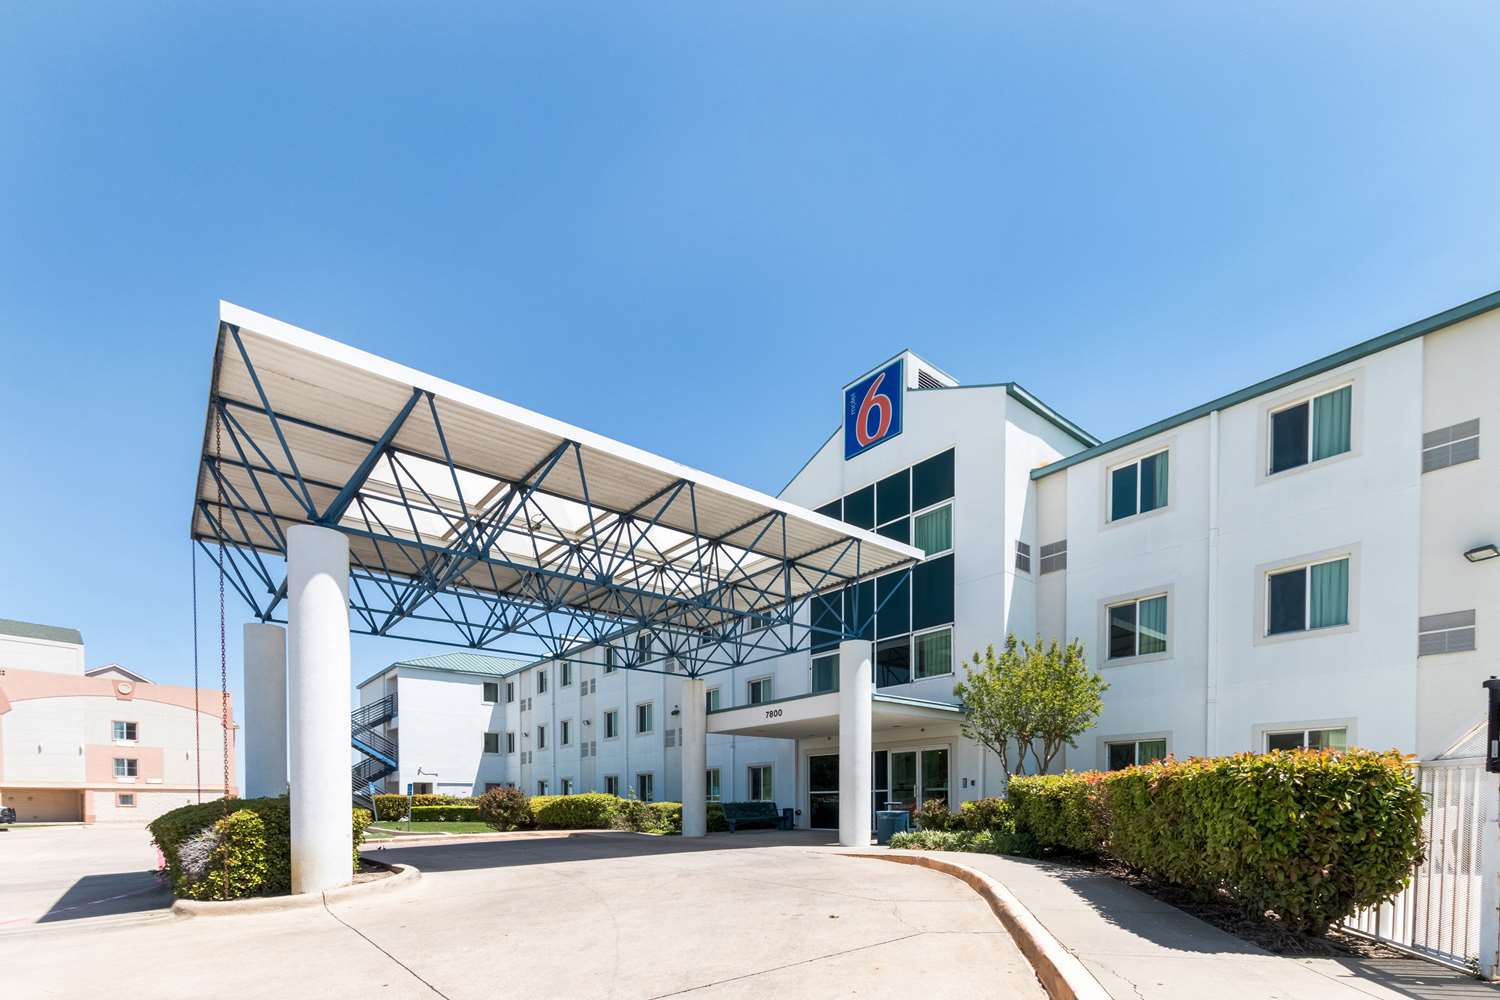 Pet Friendly Motel 6 Dallas - Dfw Airport North in Irving, Texas